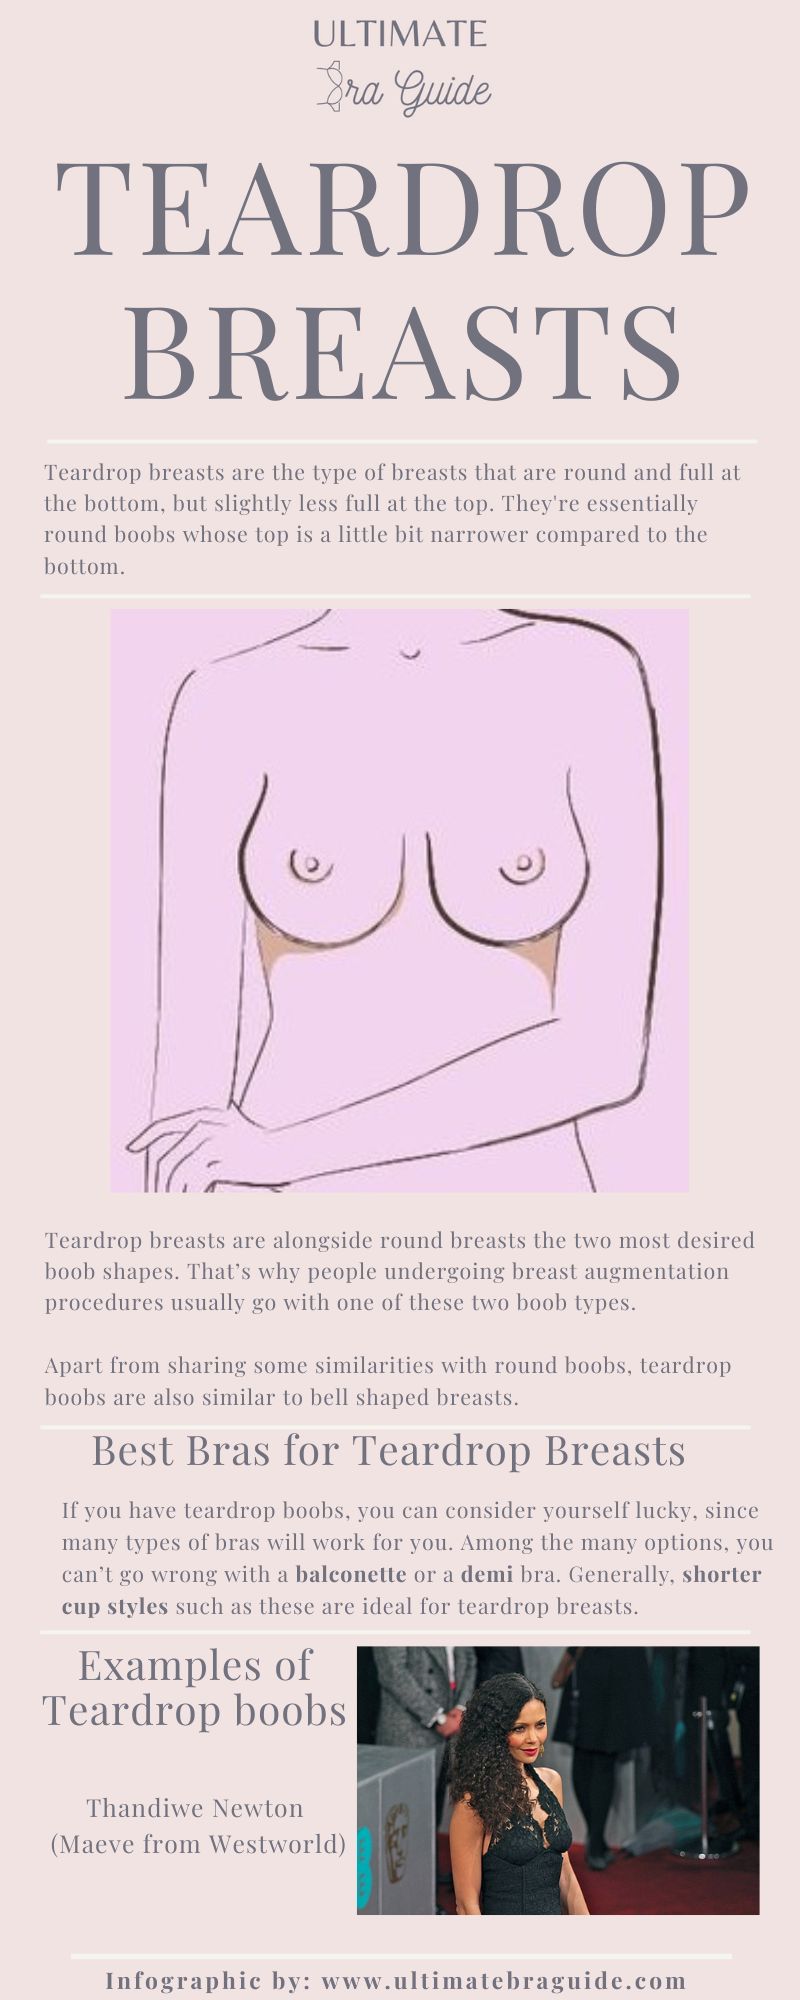 An infographic about teardrop breasts - what they are, what they look like, what are the best bras for them, and some celebrities with teardrop boobs